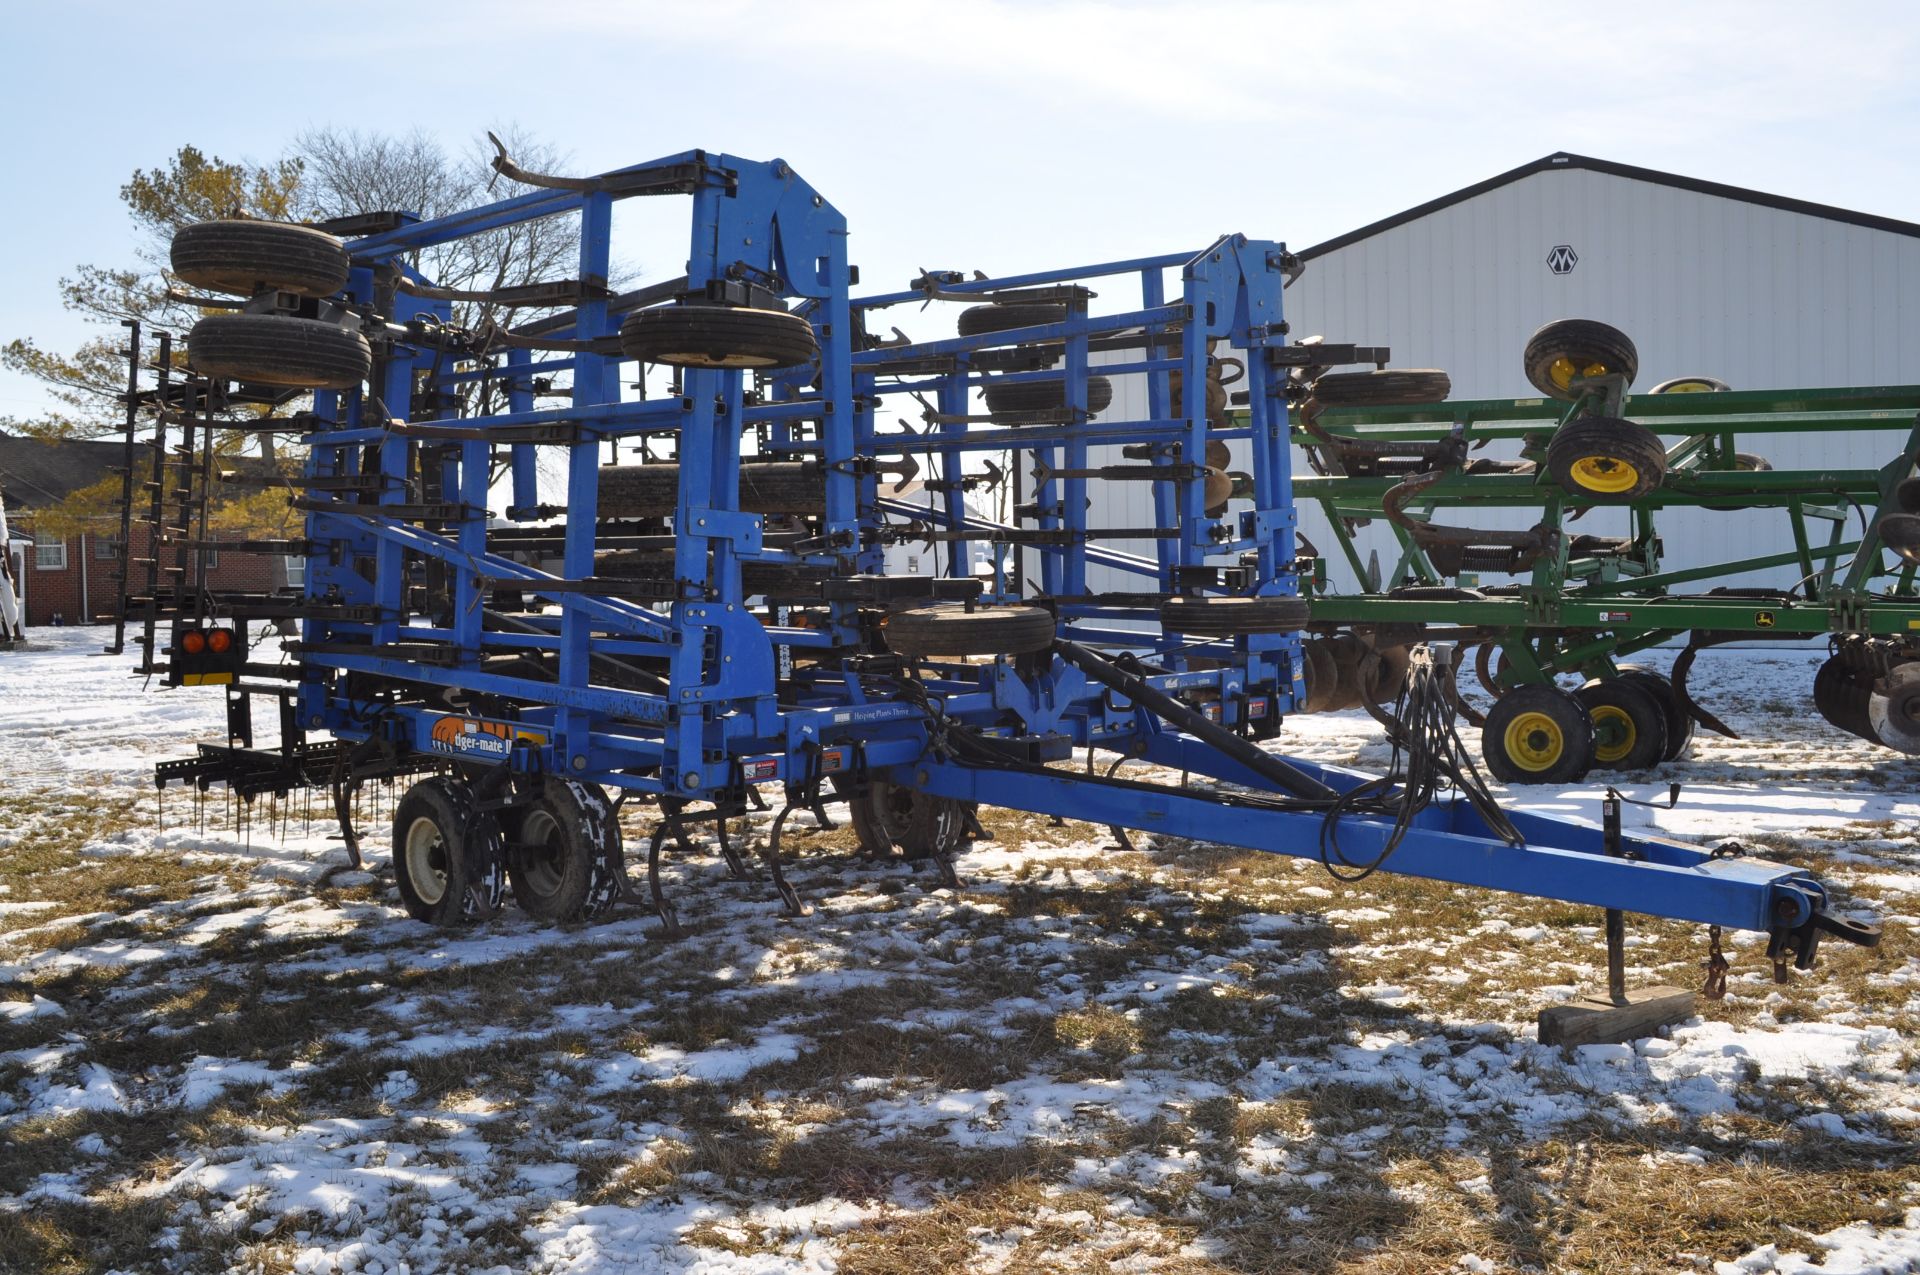 41’ DMI Tiger Mate II field cultivator, dble hyd fold, walking tandems, rear hitch, 4 bar spring - Image 5 of 21